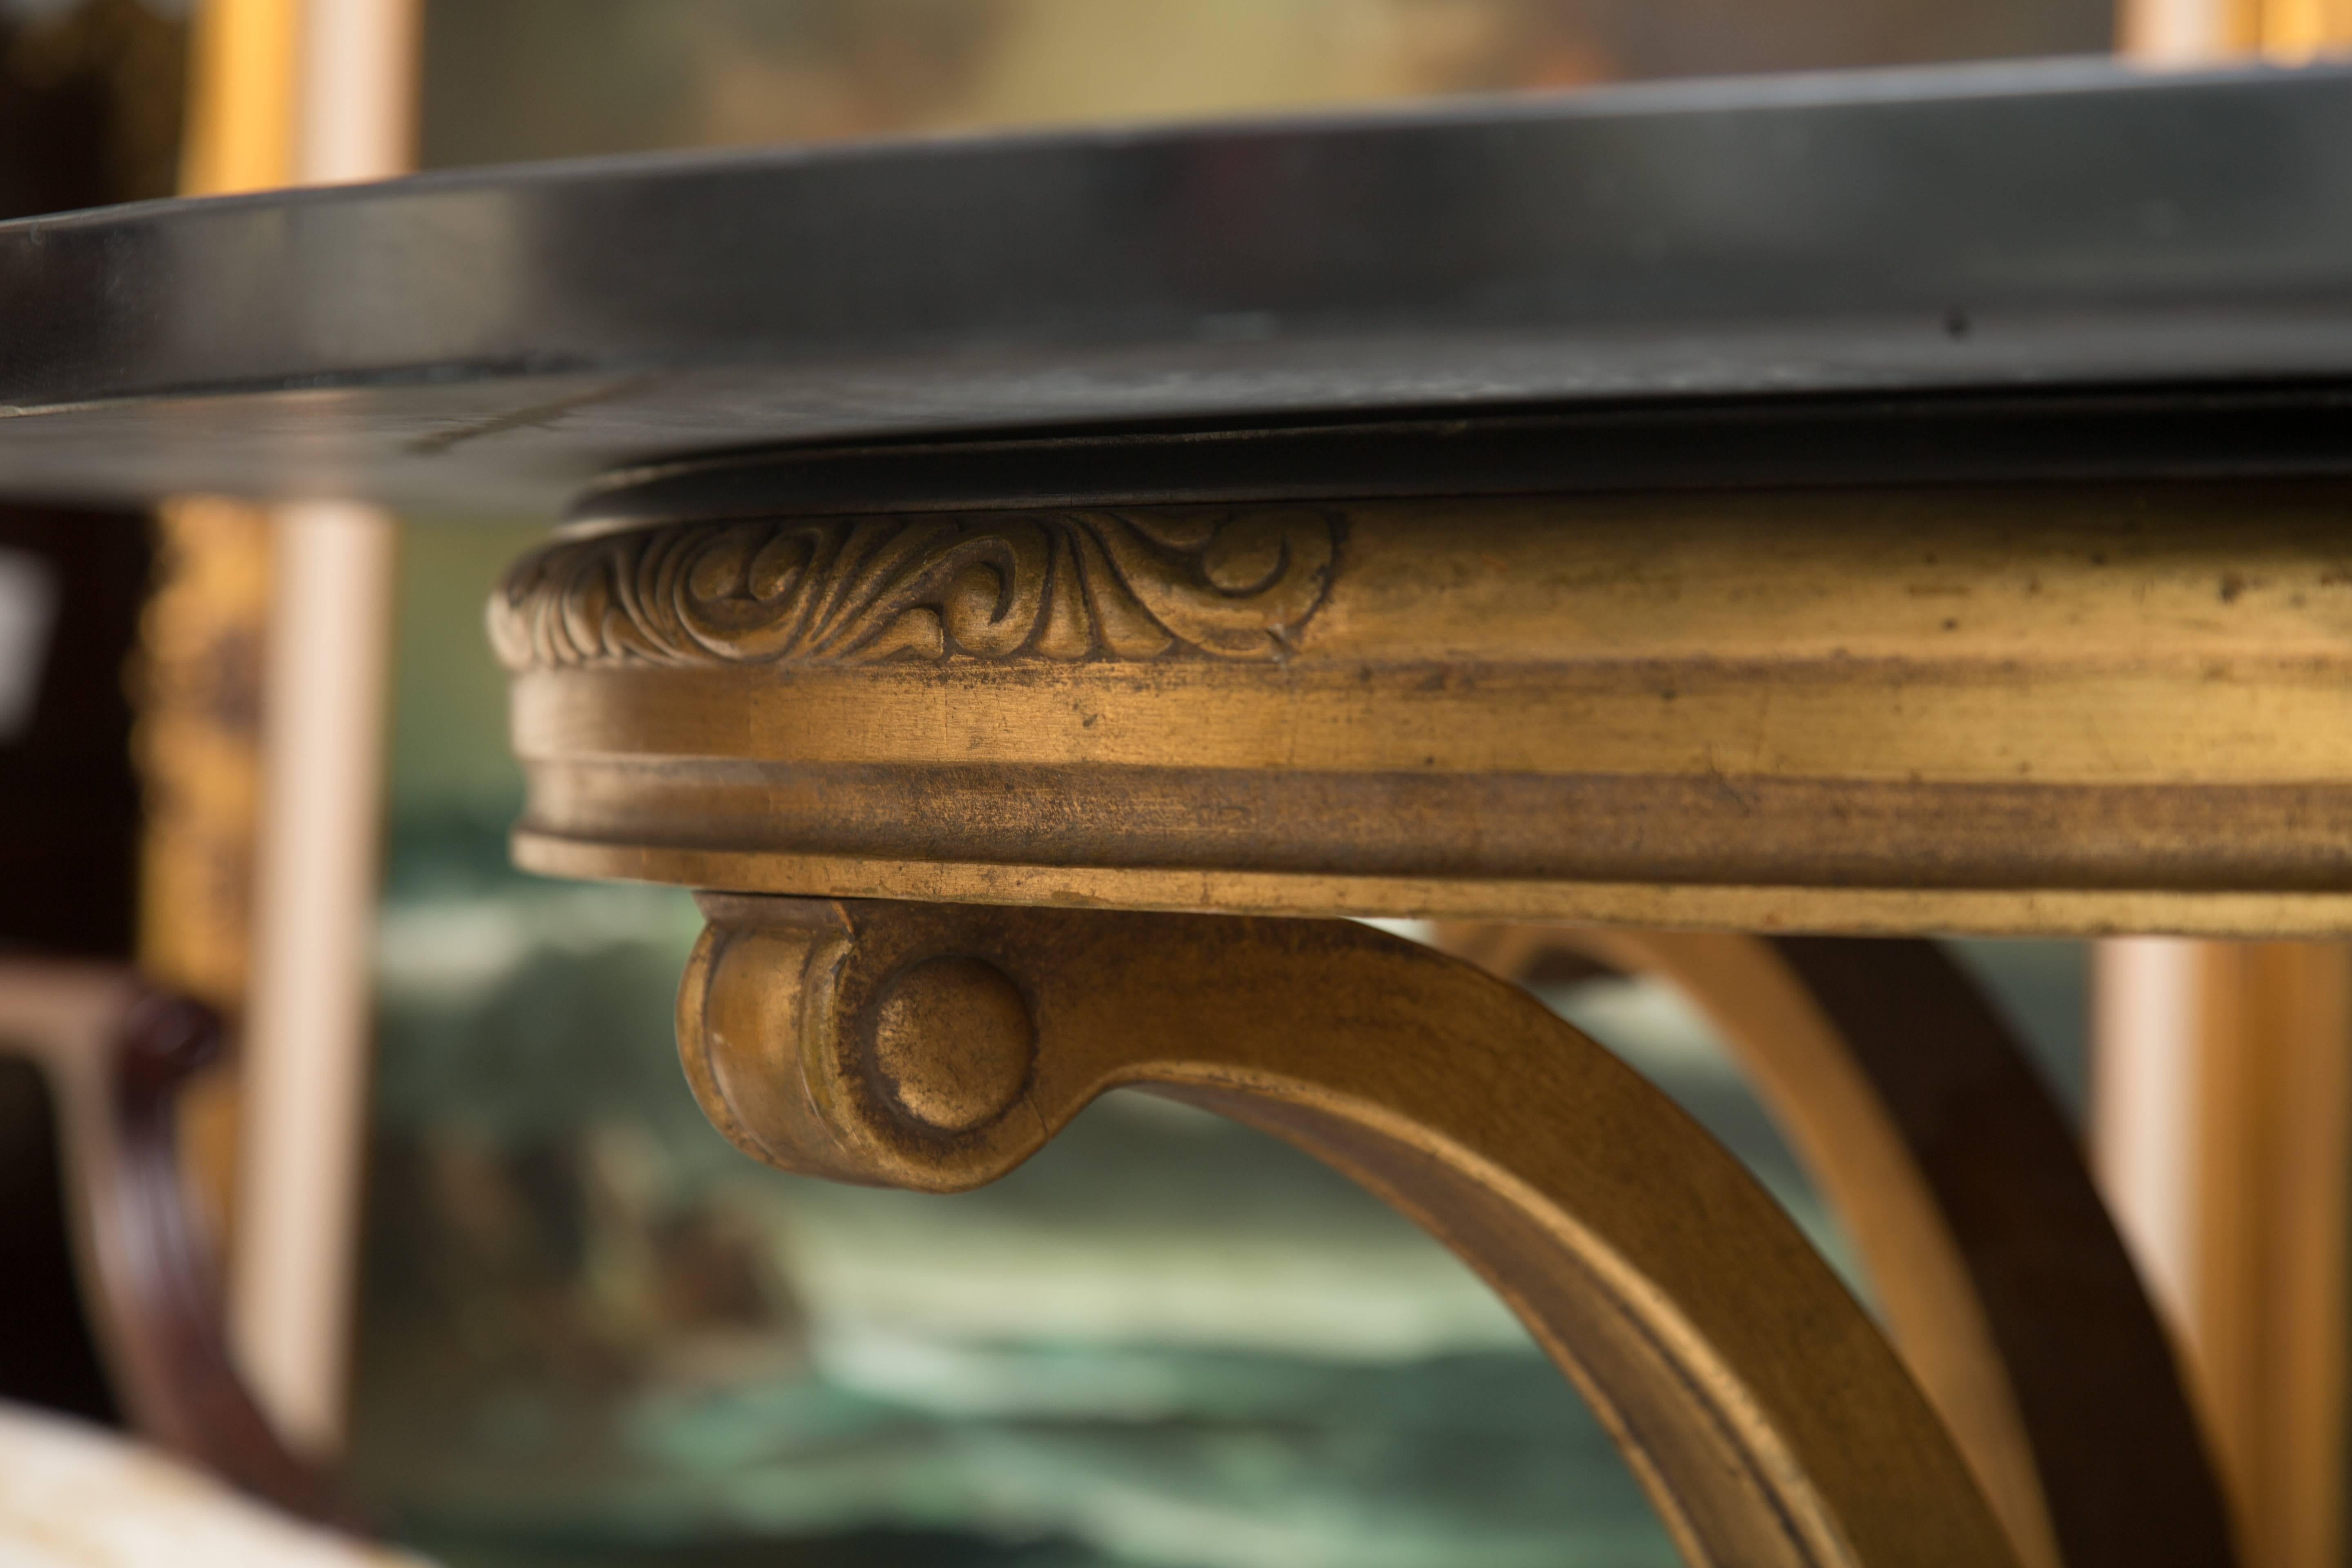 This interesting center table has a carved Italian giltwood base supporting a circular black granite top inlaid with two concentric white granite circles, 20th century.